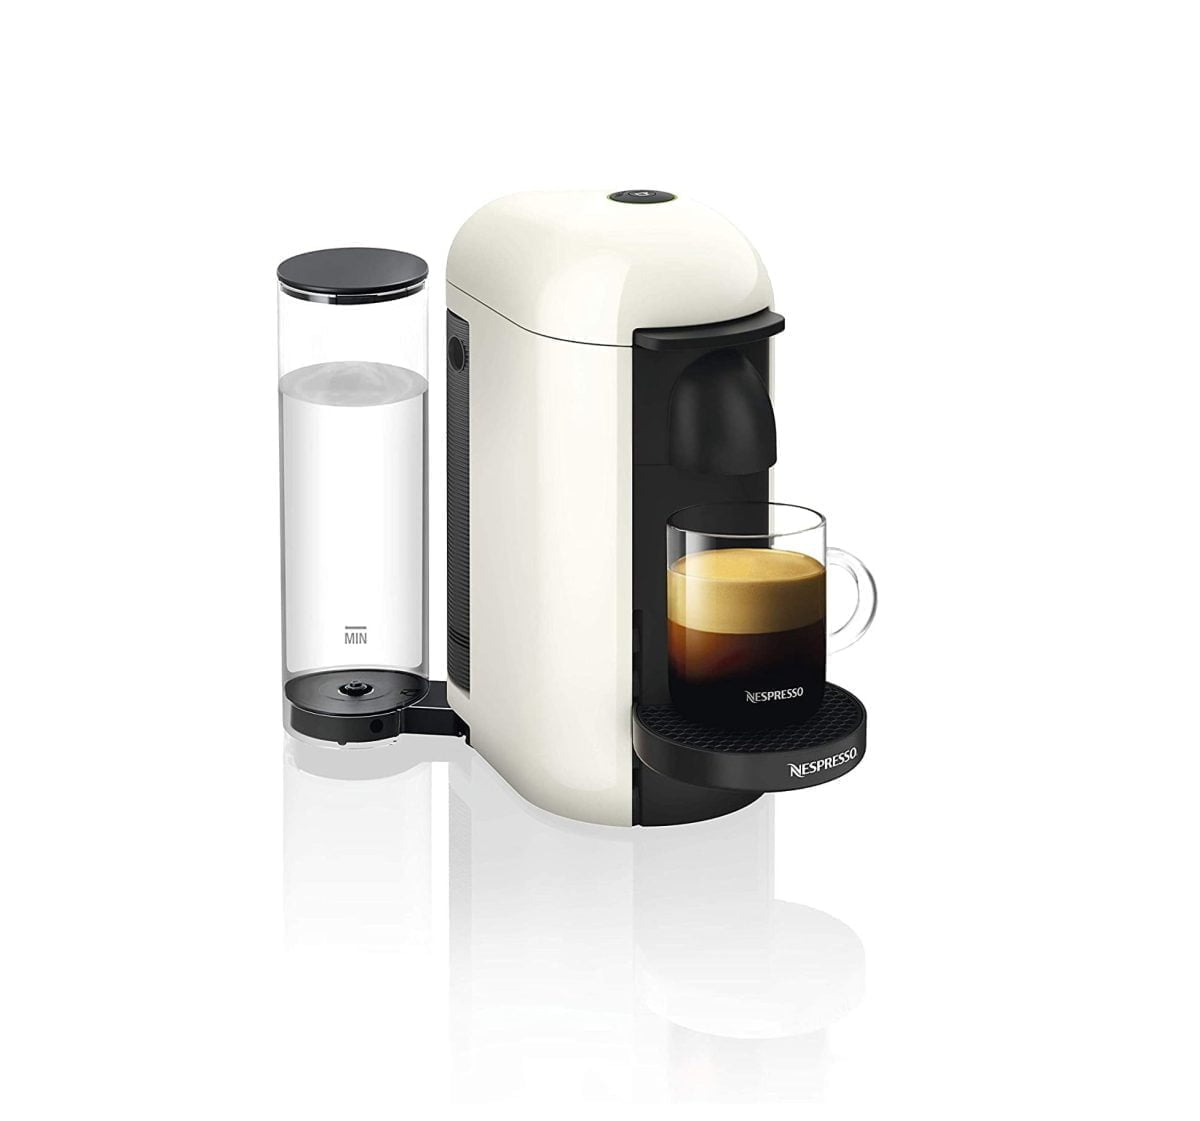 71Kb1Zlcnkl. Ac Sl1500 Nespresso &Lt;H1&Gt;Nespresso Vertuo Plus Coffee Machine White&Lt;/H1&Gt; Https://Www.youtube.com/Watch?V=Q0S8Crgww0Y &Lt;Ul Class=&Quot;A-Unordered-List A-Vertical A-Spacing-Mini&Quot;&Gt; &Lt;Li&Gt;&Lt;Span Class=&Quot;A-List-Item&Quot;&Gt;Versatile Cup Sizes: One Machine For 4 Coffee Sizes, Mug, Gran Lungo, Double Espresso, And Espresso Via 3 Different Capsule Sizes. Large Capsule For Mug, Medium For Gran Lungo And Double Espresso, And A Small One For Espresso.&Lt;/Span&Gt;&Lt;/Li&Gt; &Lt;Li&Gt;&Lt;Span Class=&Quot;A-List-Item&Quot;&Gt;Perfect In Cup Results Every Time: Freshly Brewed Coffee, With Naturally Formed Crema And Full Bodied Coffee.&Lt;/Span&Gt;&Lt;/Li&Gt; &Lt;Li&Gt;&Lt;Span Class=&Quot;A-List-Item&Quot;&Gt;High Convenience And Flexibility: Simple And Convenient 1 Button Preparation, Moveable Water Tank As Well As Automatic Capsule Ejection And Electrical Opening And Closing.&Lt;/Span&Gt;&Lt;/Li&Gt; &Lt;Li&Gt;&Lt;Span Class=&Quot;A-List-Item&Quot;&Gt;Design: Larger Water Tank And Capsule Container.&Lt;/Span&Gt;&Lt;/Li&Gt; &Lt;Li&Gt;&Lt;Span Class=&Quot;A-List-Item&Quot;&Gt;Works Exclusively With Nespresso Vertuo Pods&Lt;/Span&Gt;&Lt;/Li&Gt; &Lt;/Ul&Gt; &Lt;H4&Gt;Warranty : 1 Year (Shipping Not Included)&Lt;/H4&Gt; &Lt;B&Gt;We Also Provide International Wholesale And Retail Shipping To All Gcc Countries: Saudi Arabia, Qatar, Oman, Kuwait, Bahrain&Lt;/B&Gt; Nespresso Vertuo Plus Coffee Machine Nespresso Vertuo Plus Coffee Machine White